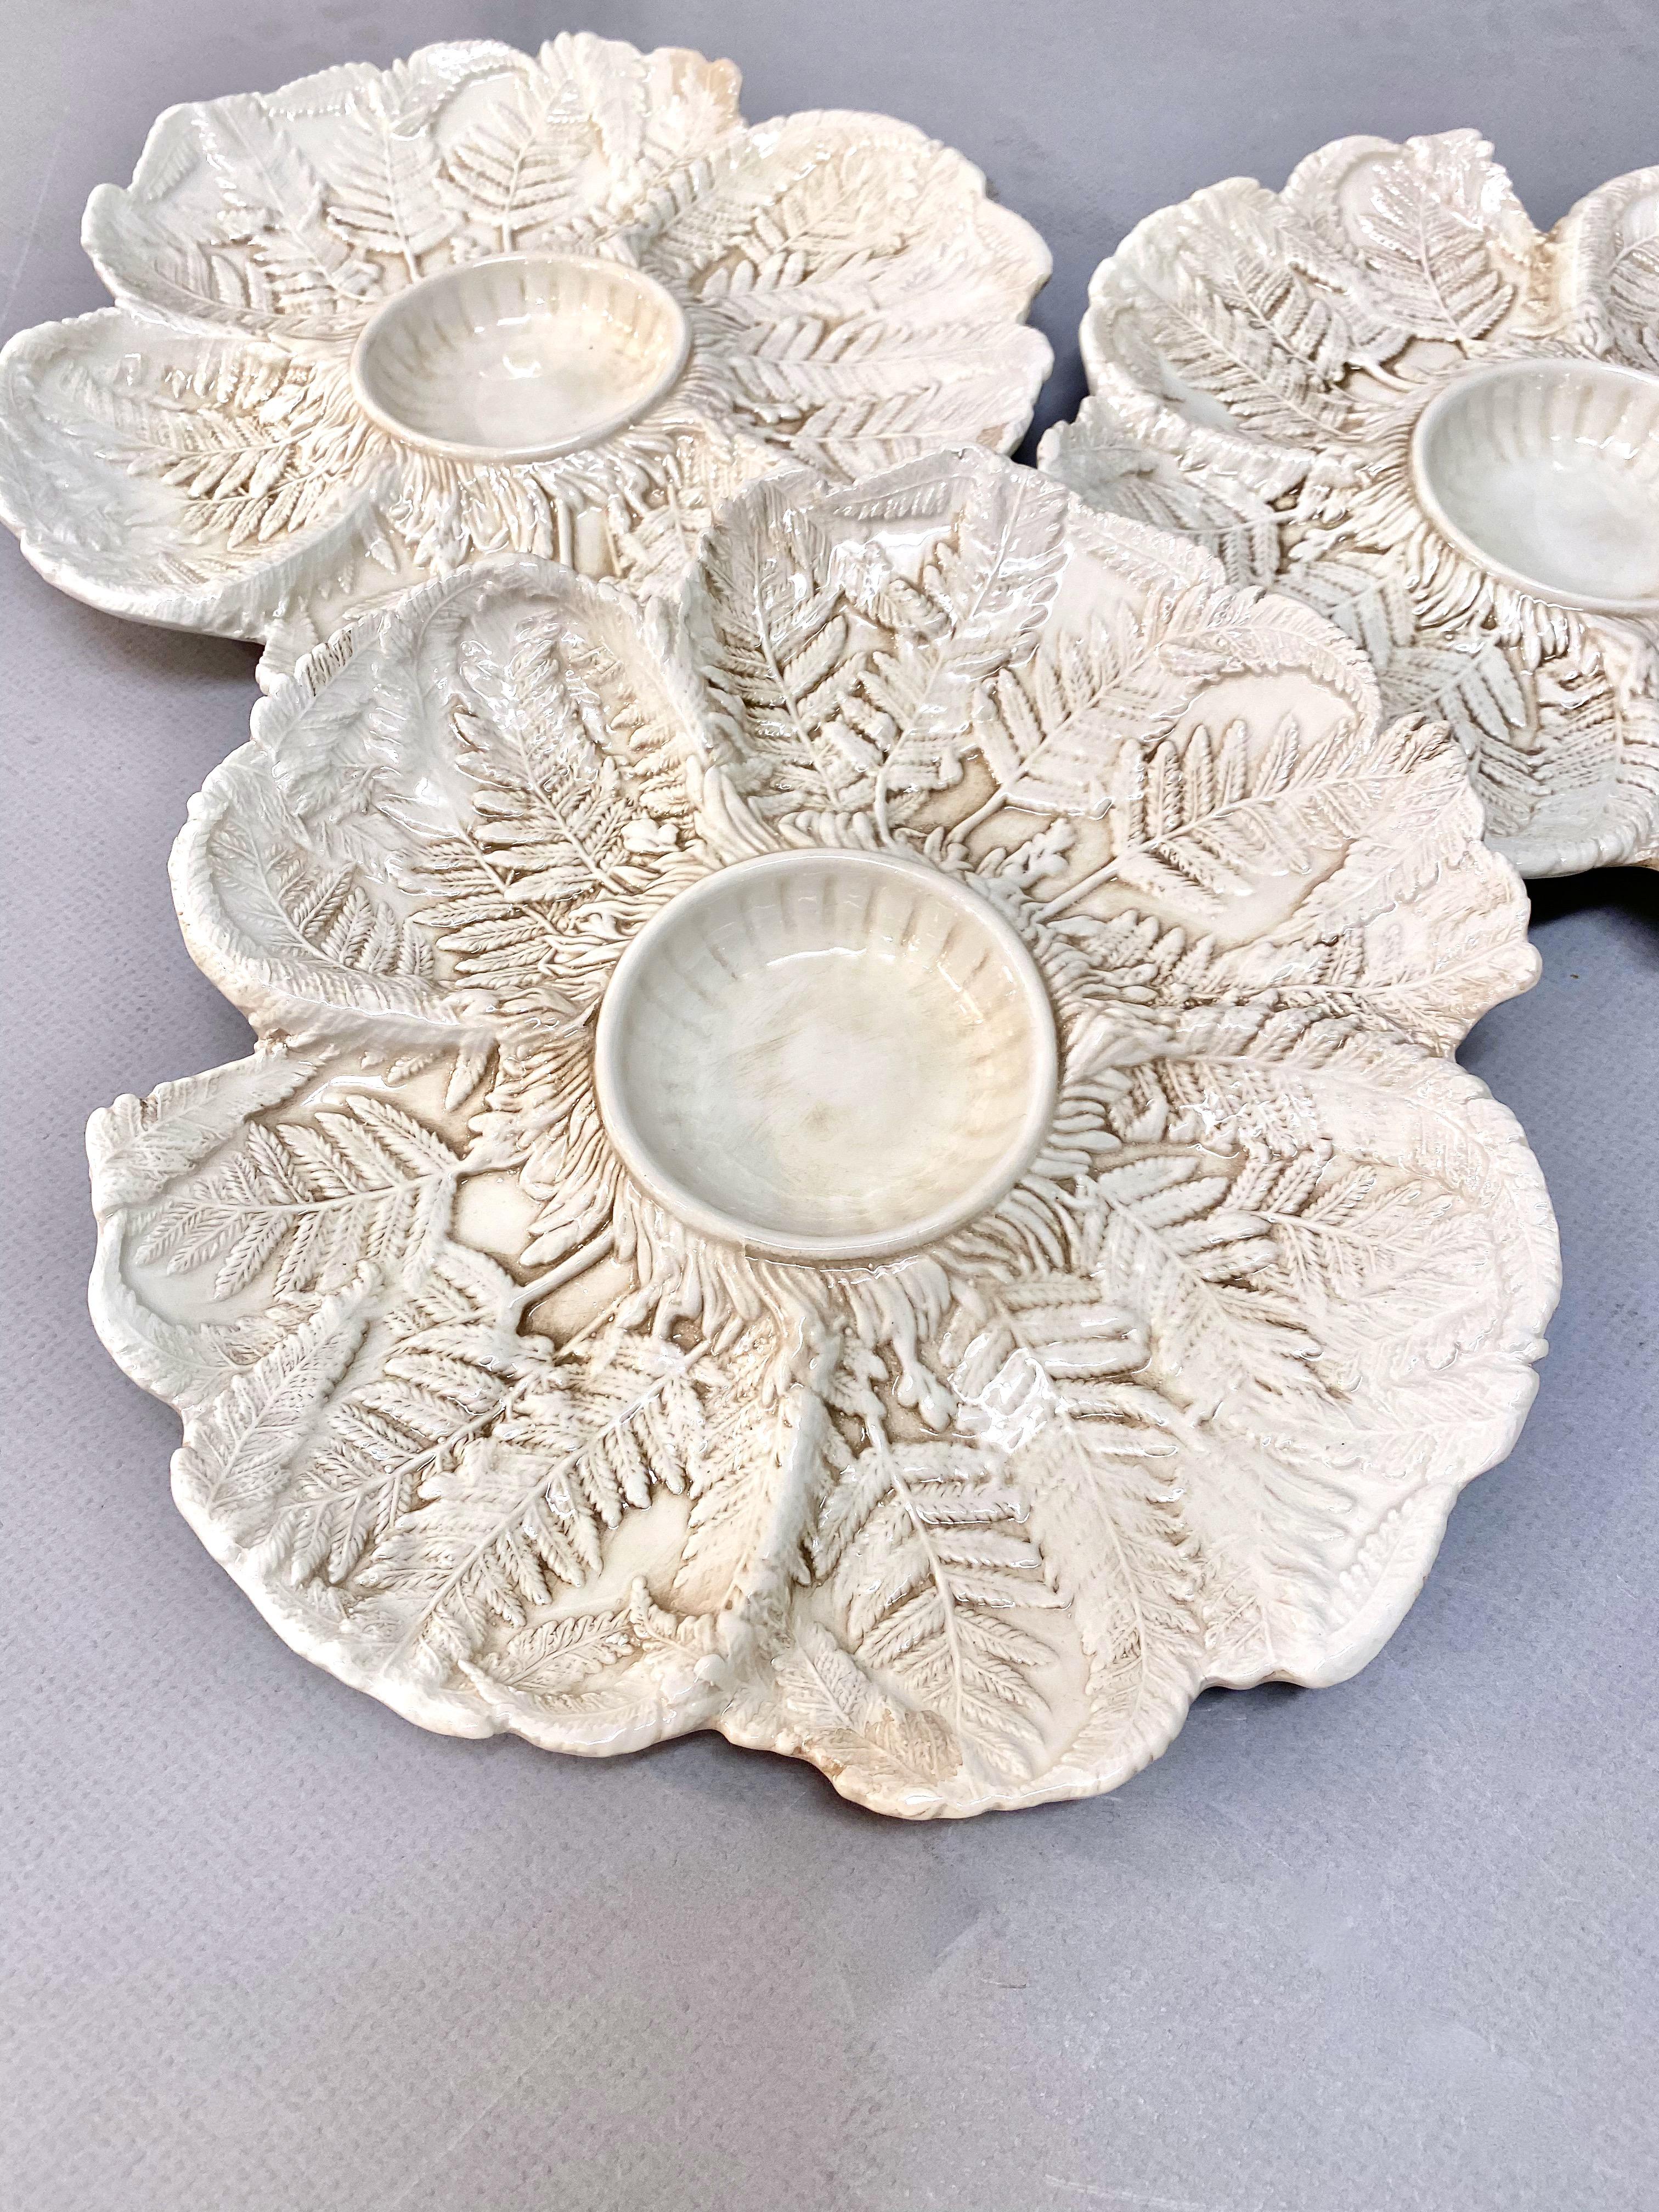 This is an unusual set of 12 early to mid 20th century artichoke plates that are finely designed with a raised incised fern leaf pattern. The raised leaf pattern is highlighted by a pale sienna wash. The plates have no apparent faults, although